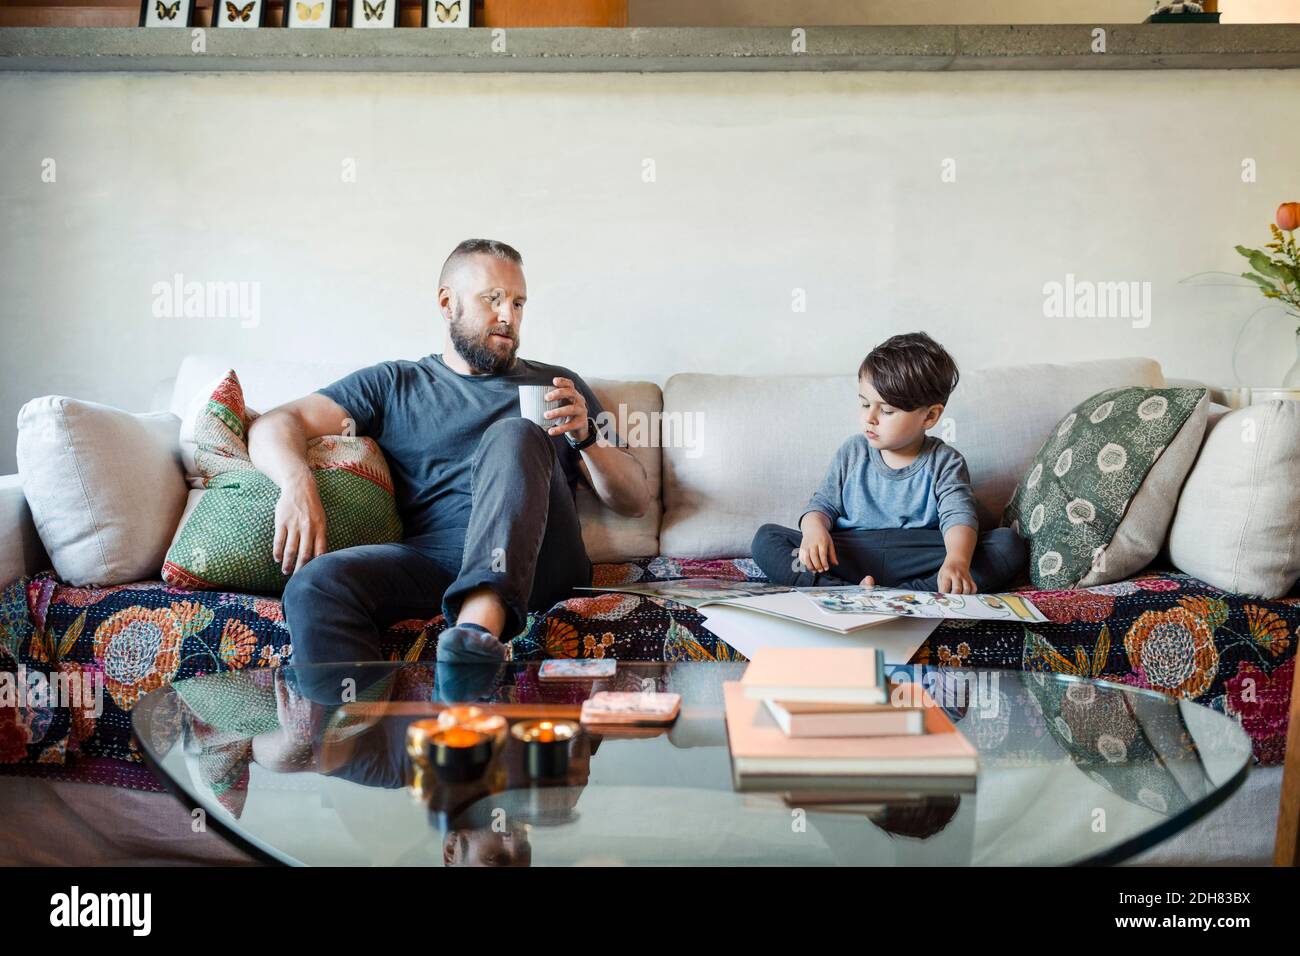 Father holding coffee mug while assisting son in doing homework at home Stock Photo